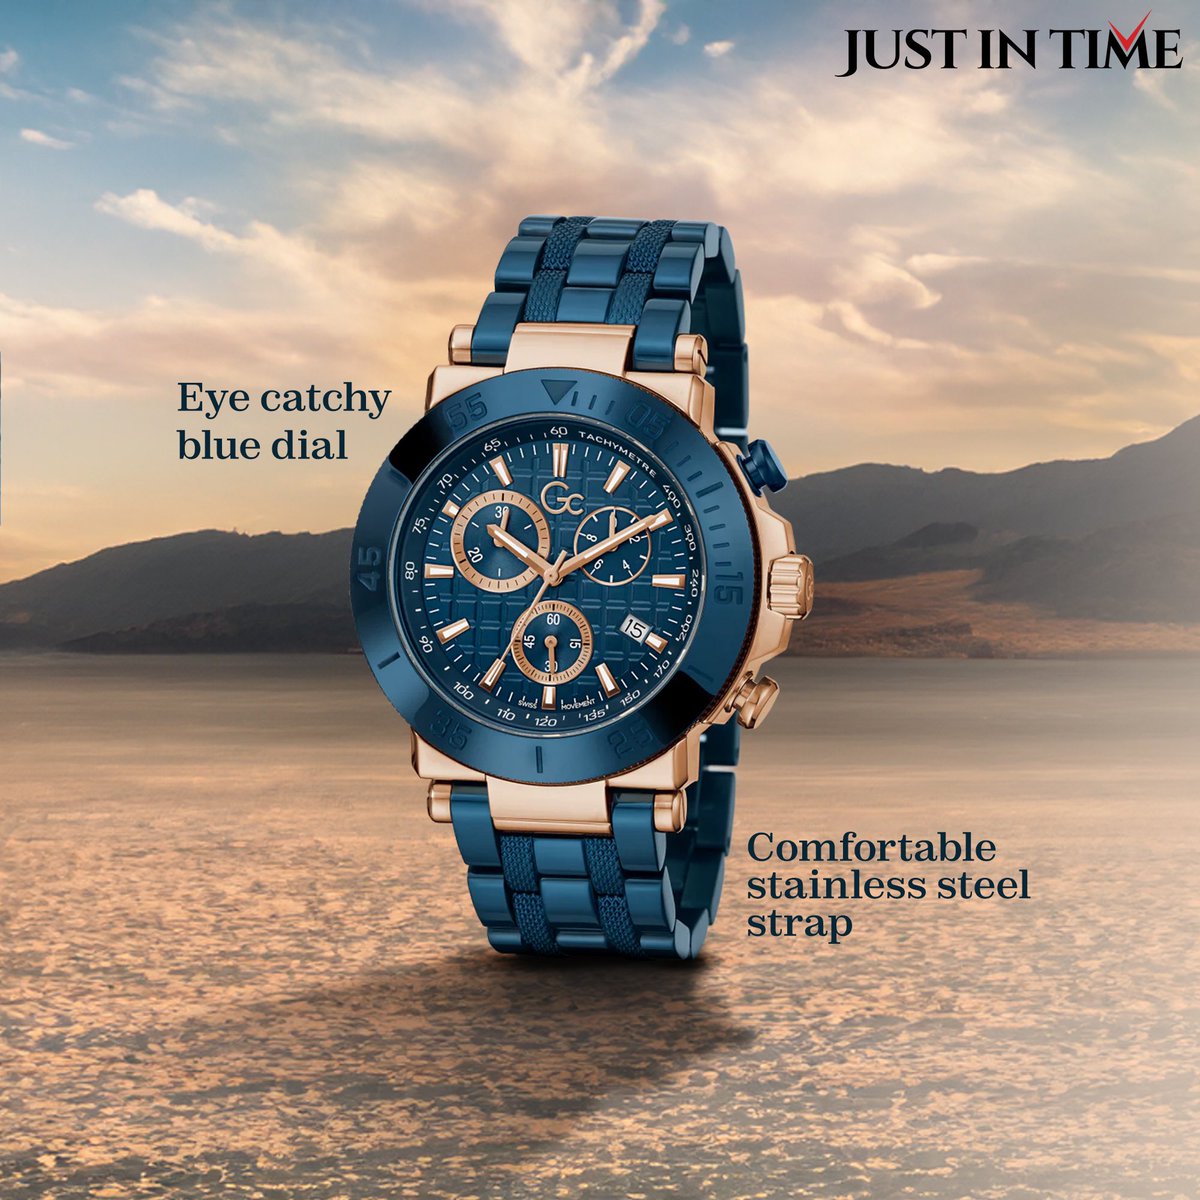 Upgrade your wrist game with a tachymeter that's as smart as it looks. ⌚

Watch Displayed: 
Male Blue Stainless Steel Chronograph Watch Y70001G7MF

#JustInTime #JustInTimeWatches #TachymeterWatches #SmartWatchGoals #TachymeterTech #TechSavvyStyle #StainlessSteel #SmartAndStylish